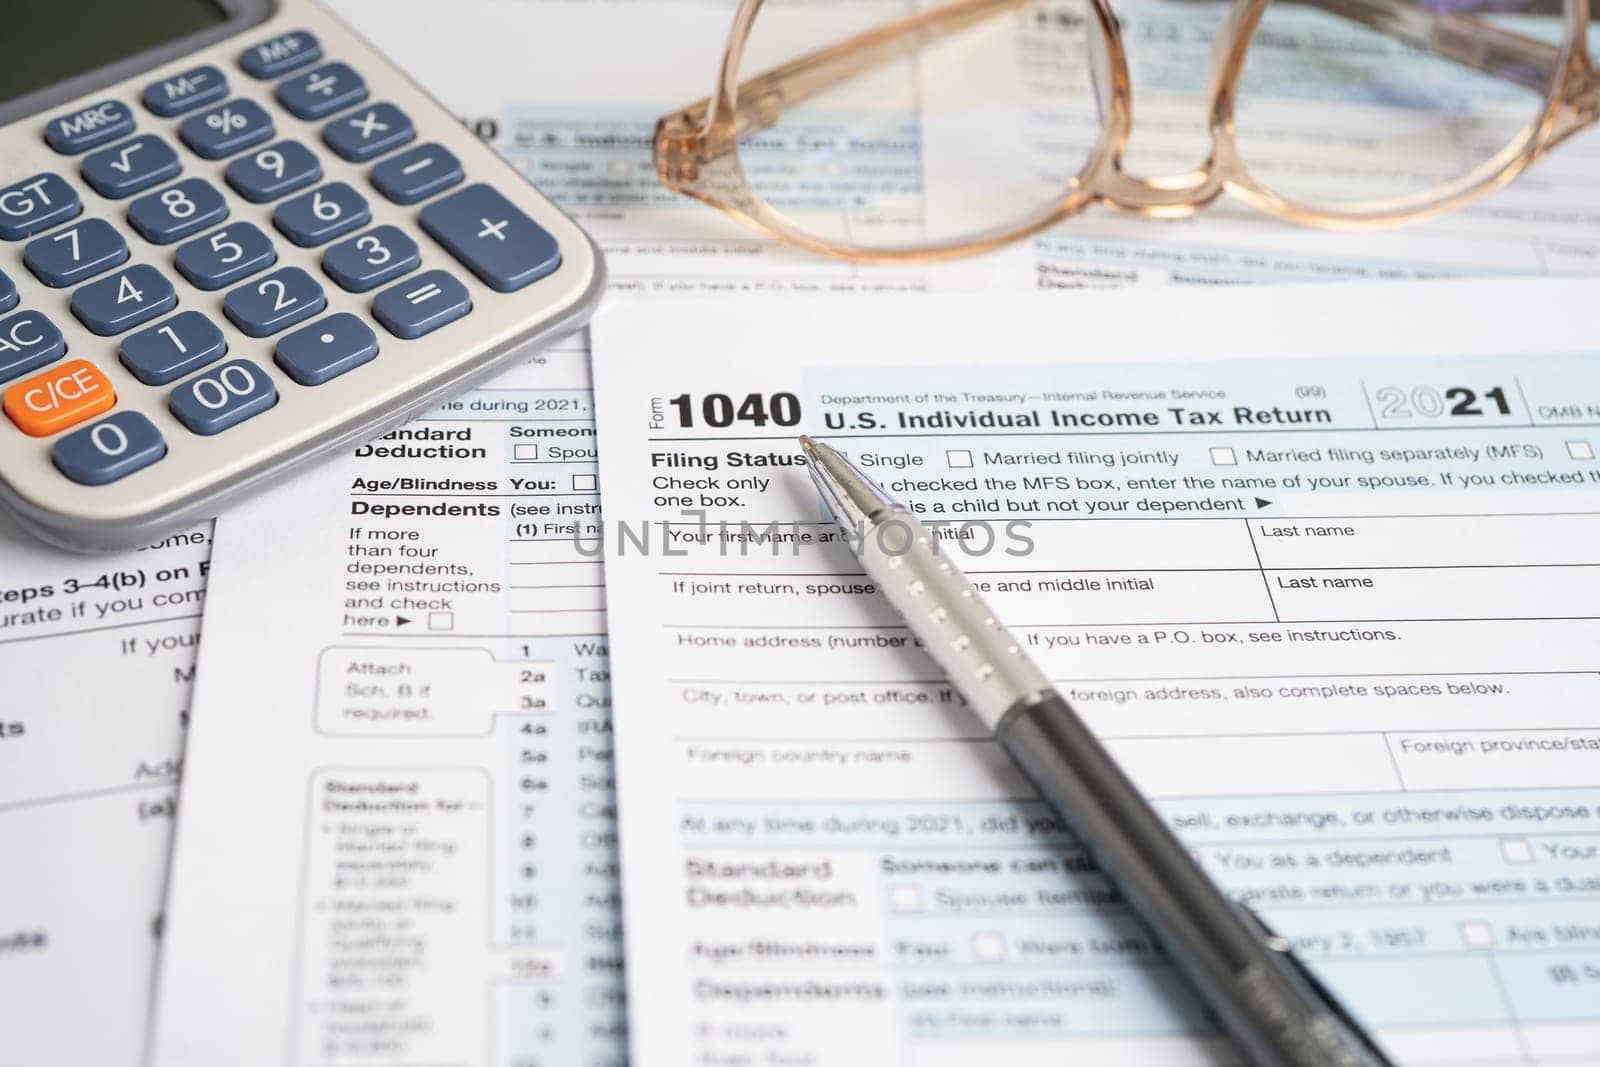 Form 1040, U.S. Individual Income Tax Return, tax forms in the U.S. tax system. by pamai